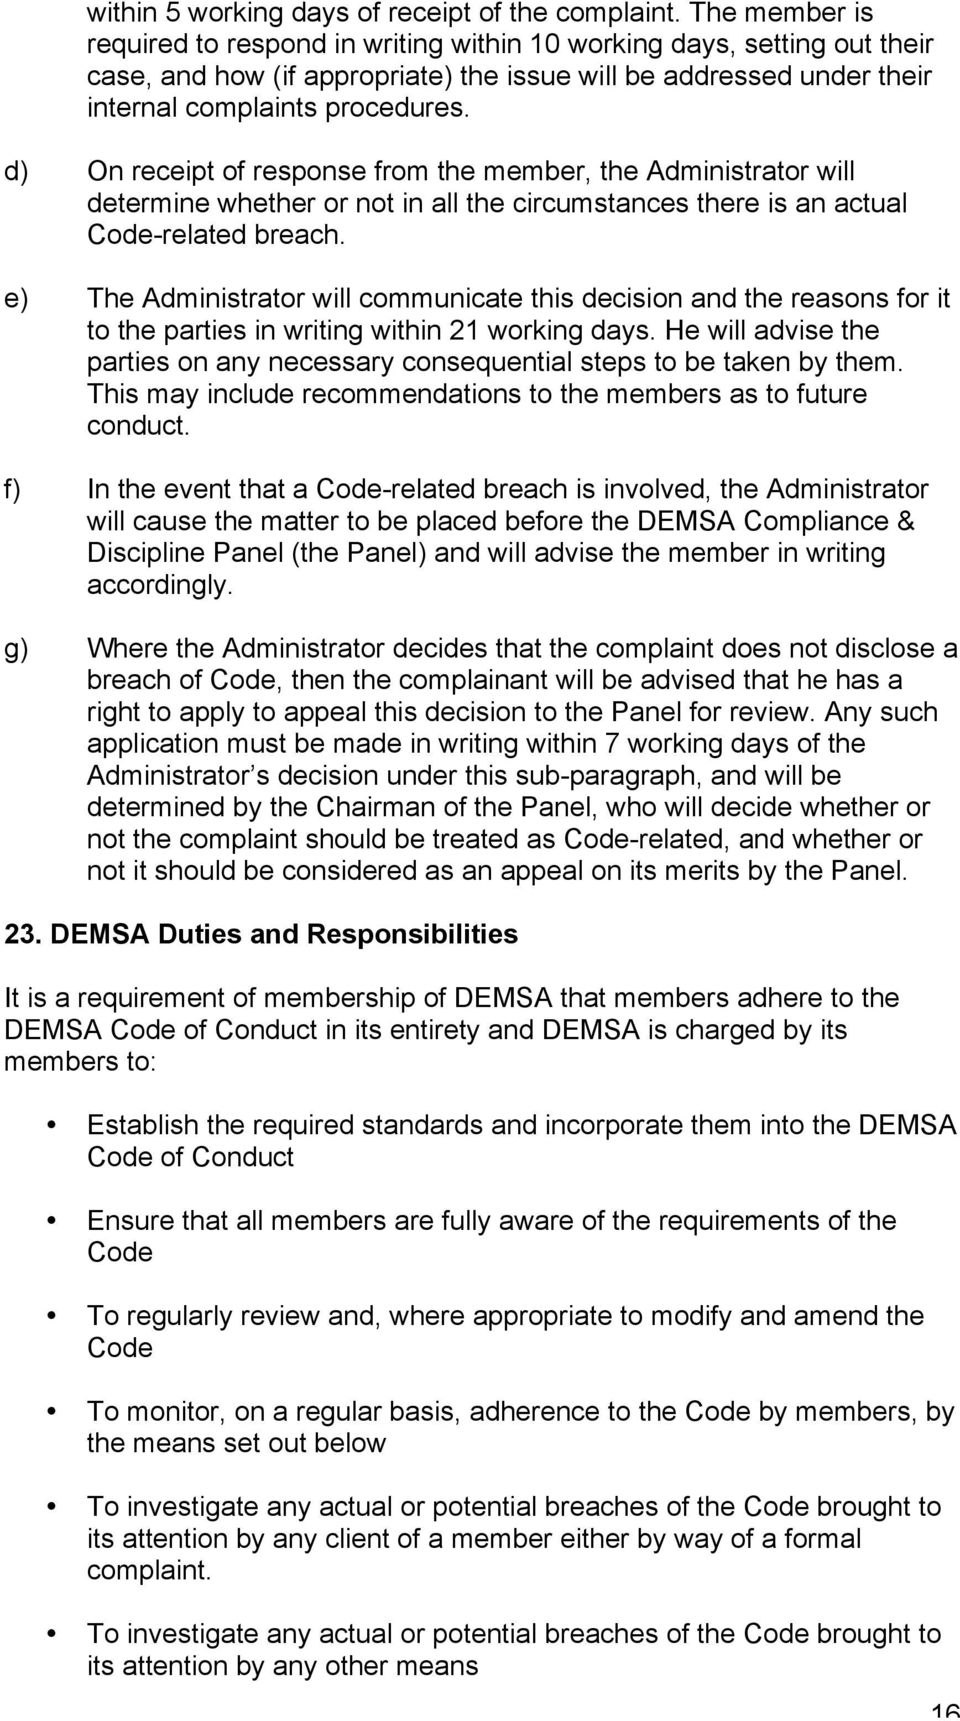 d) On receipt of response from the member, the Administrator will determine whether or not in all the circumstances there is an actual Code-related breach.